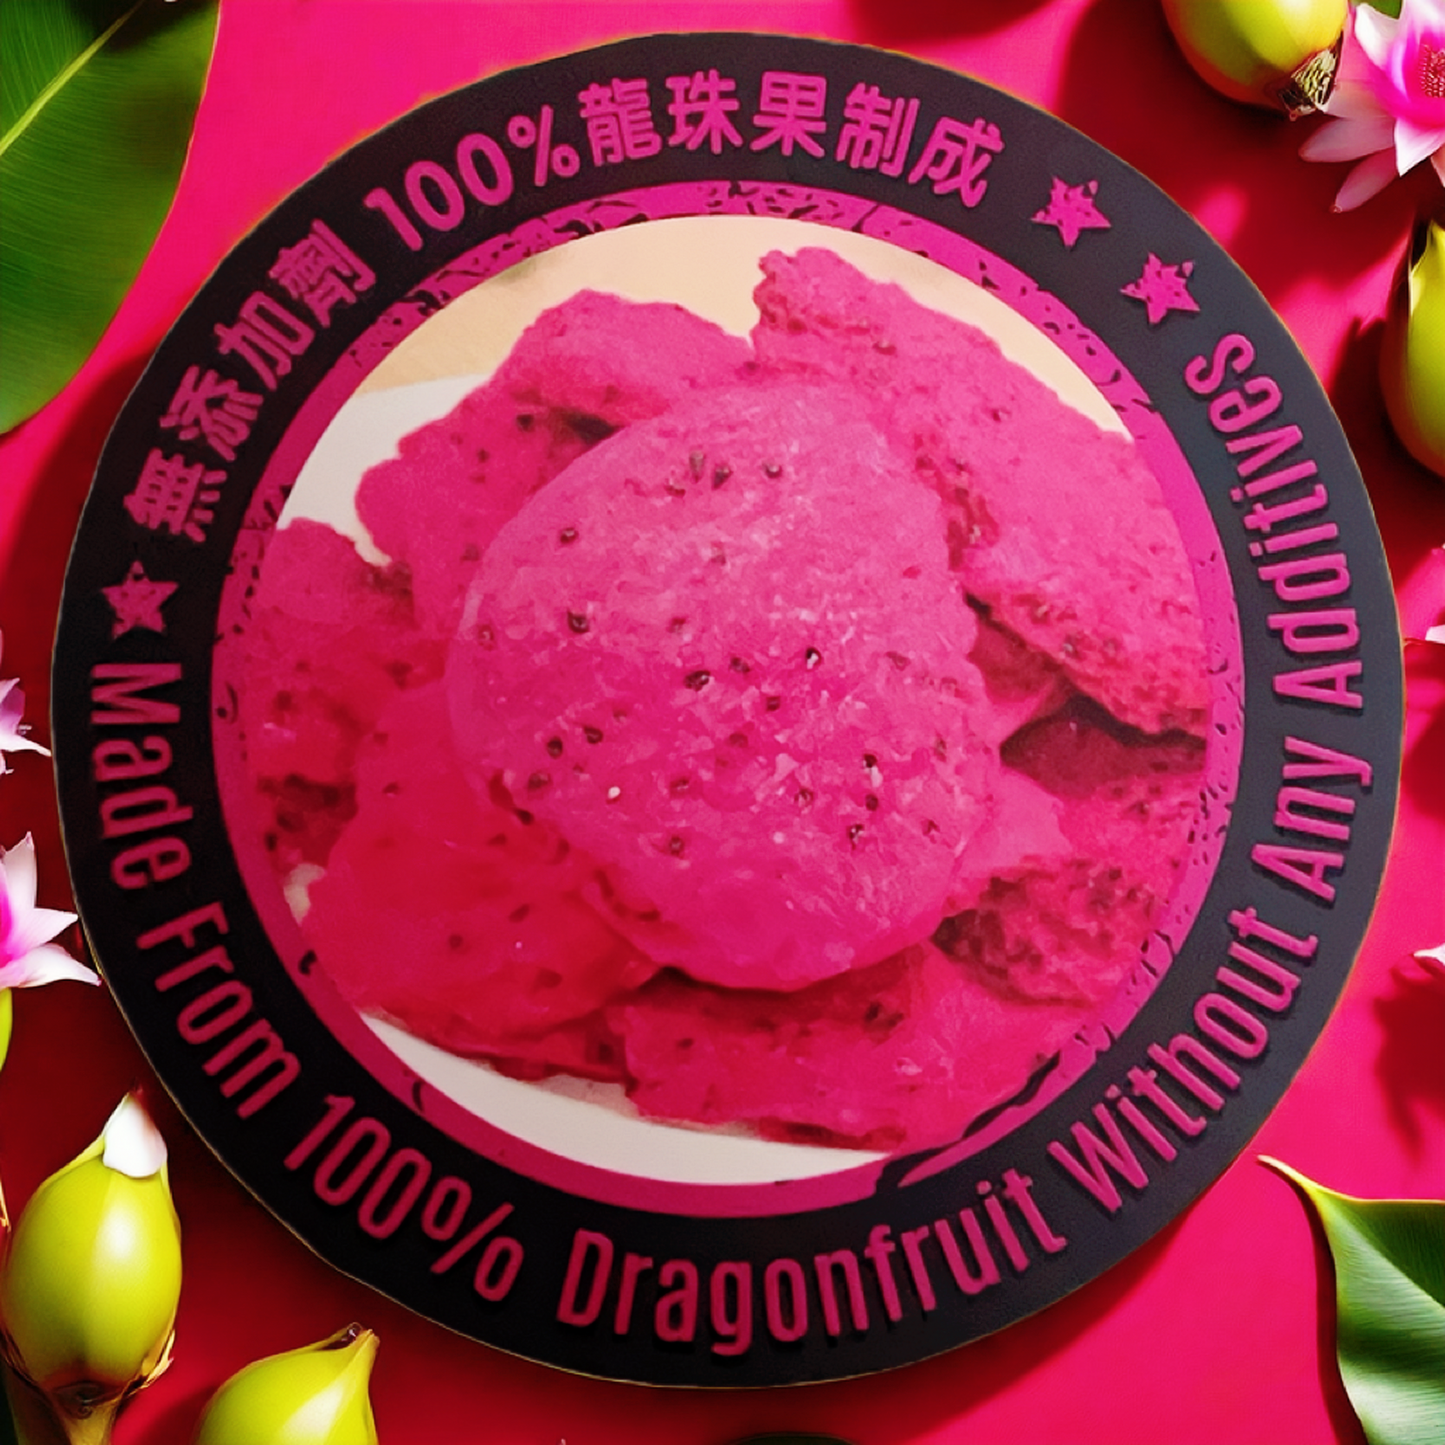 Dragon fruit tastes crunchy and freeze-dried